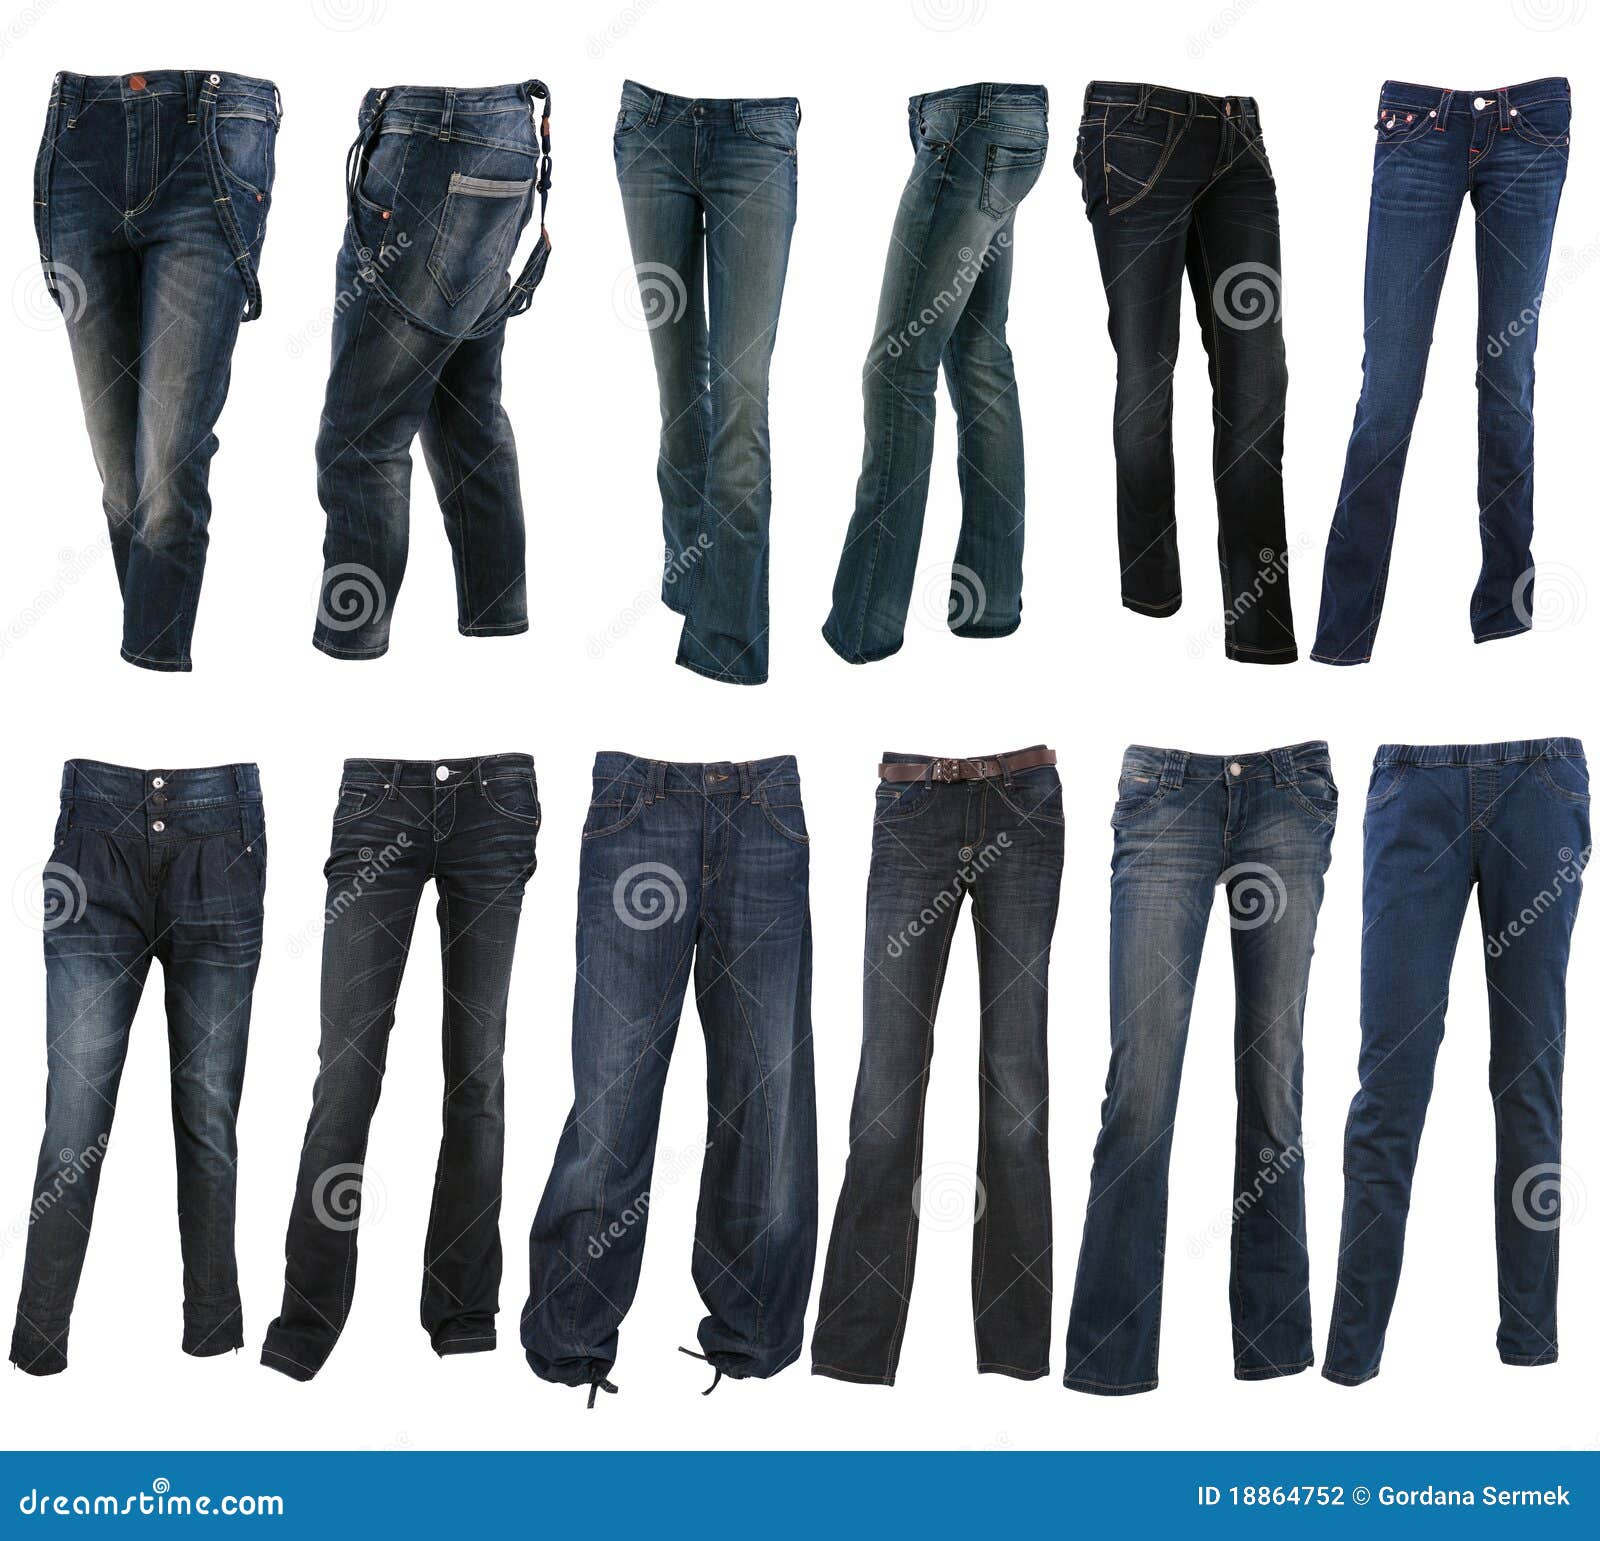 20 Stylish Models of Jeans for Men  Trending and Best Collection